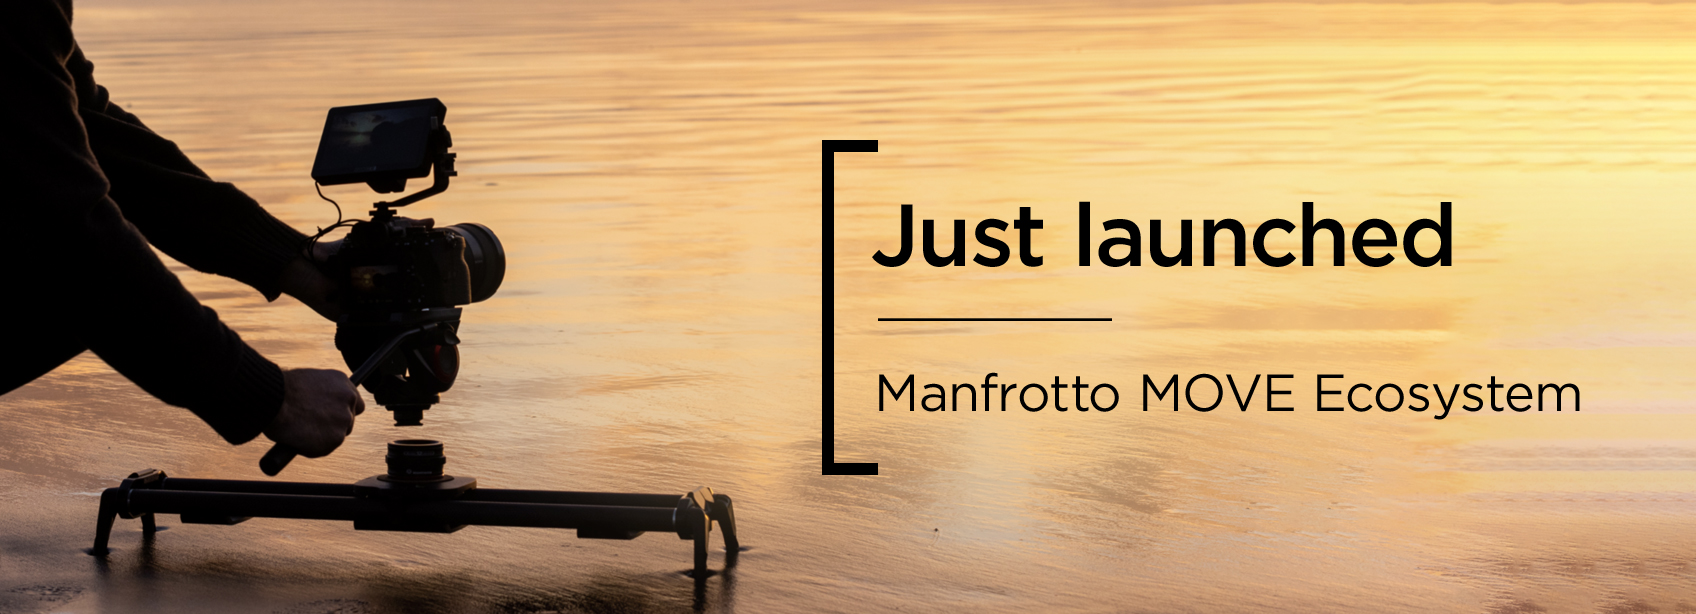 Manfrotto tripod and video emotional image